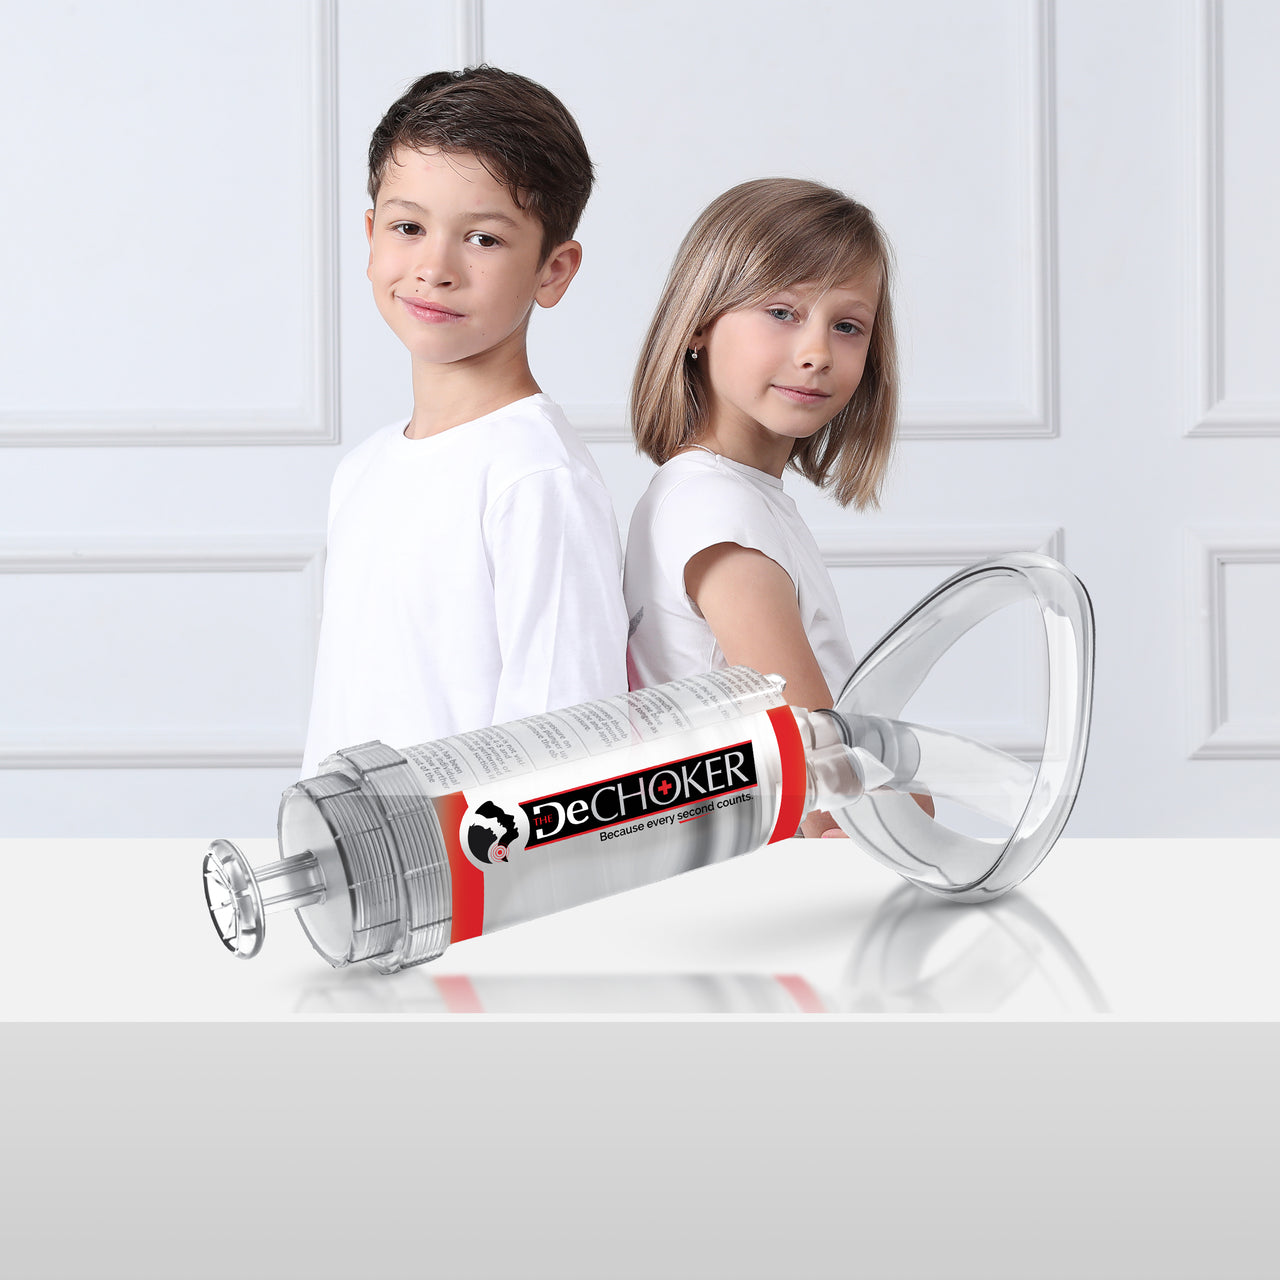 Buy ONE DECHOKER® device (Child, Toddler or Adult Size)